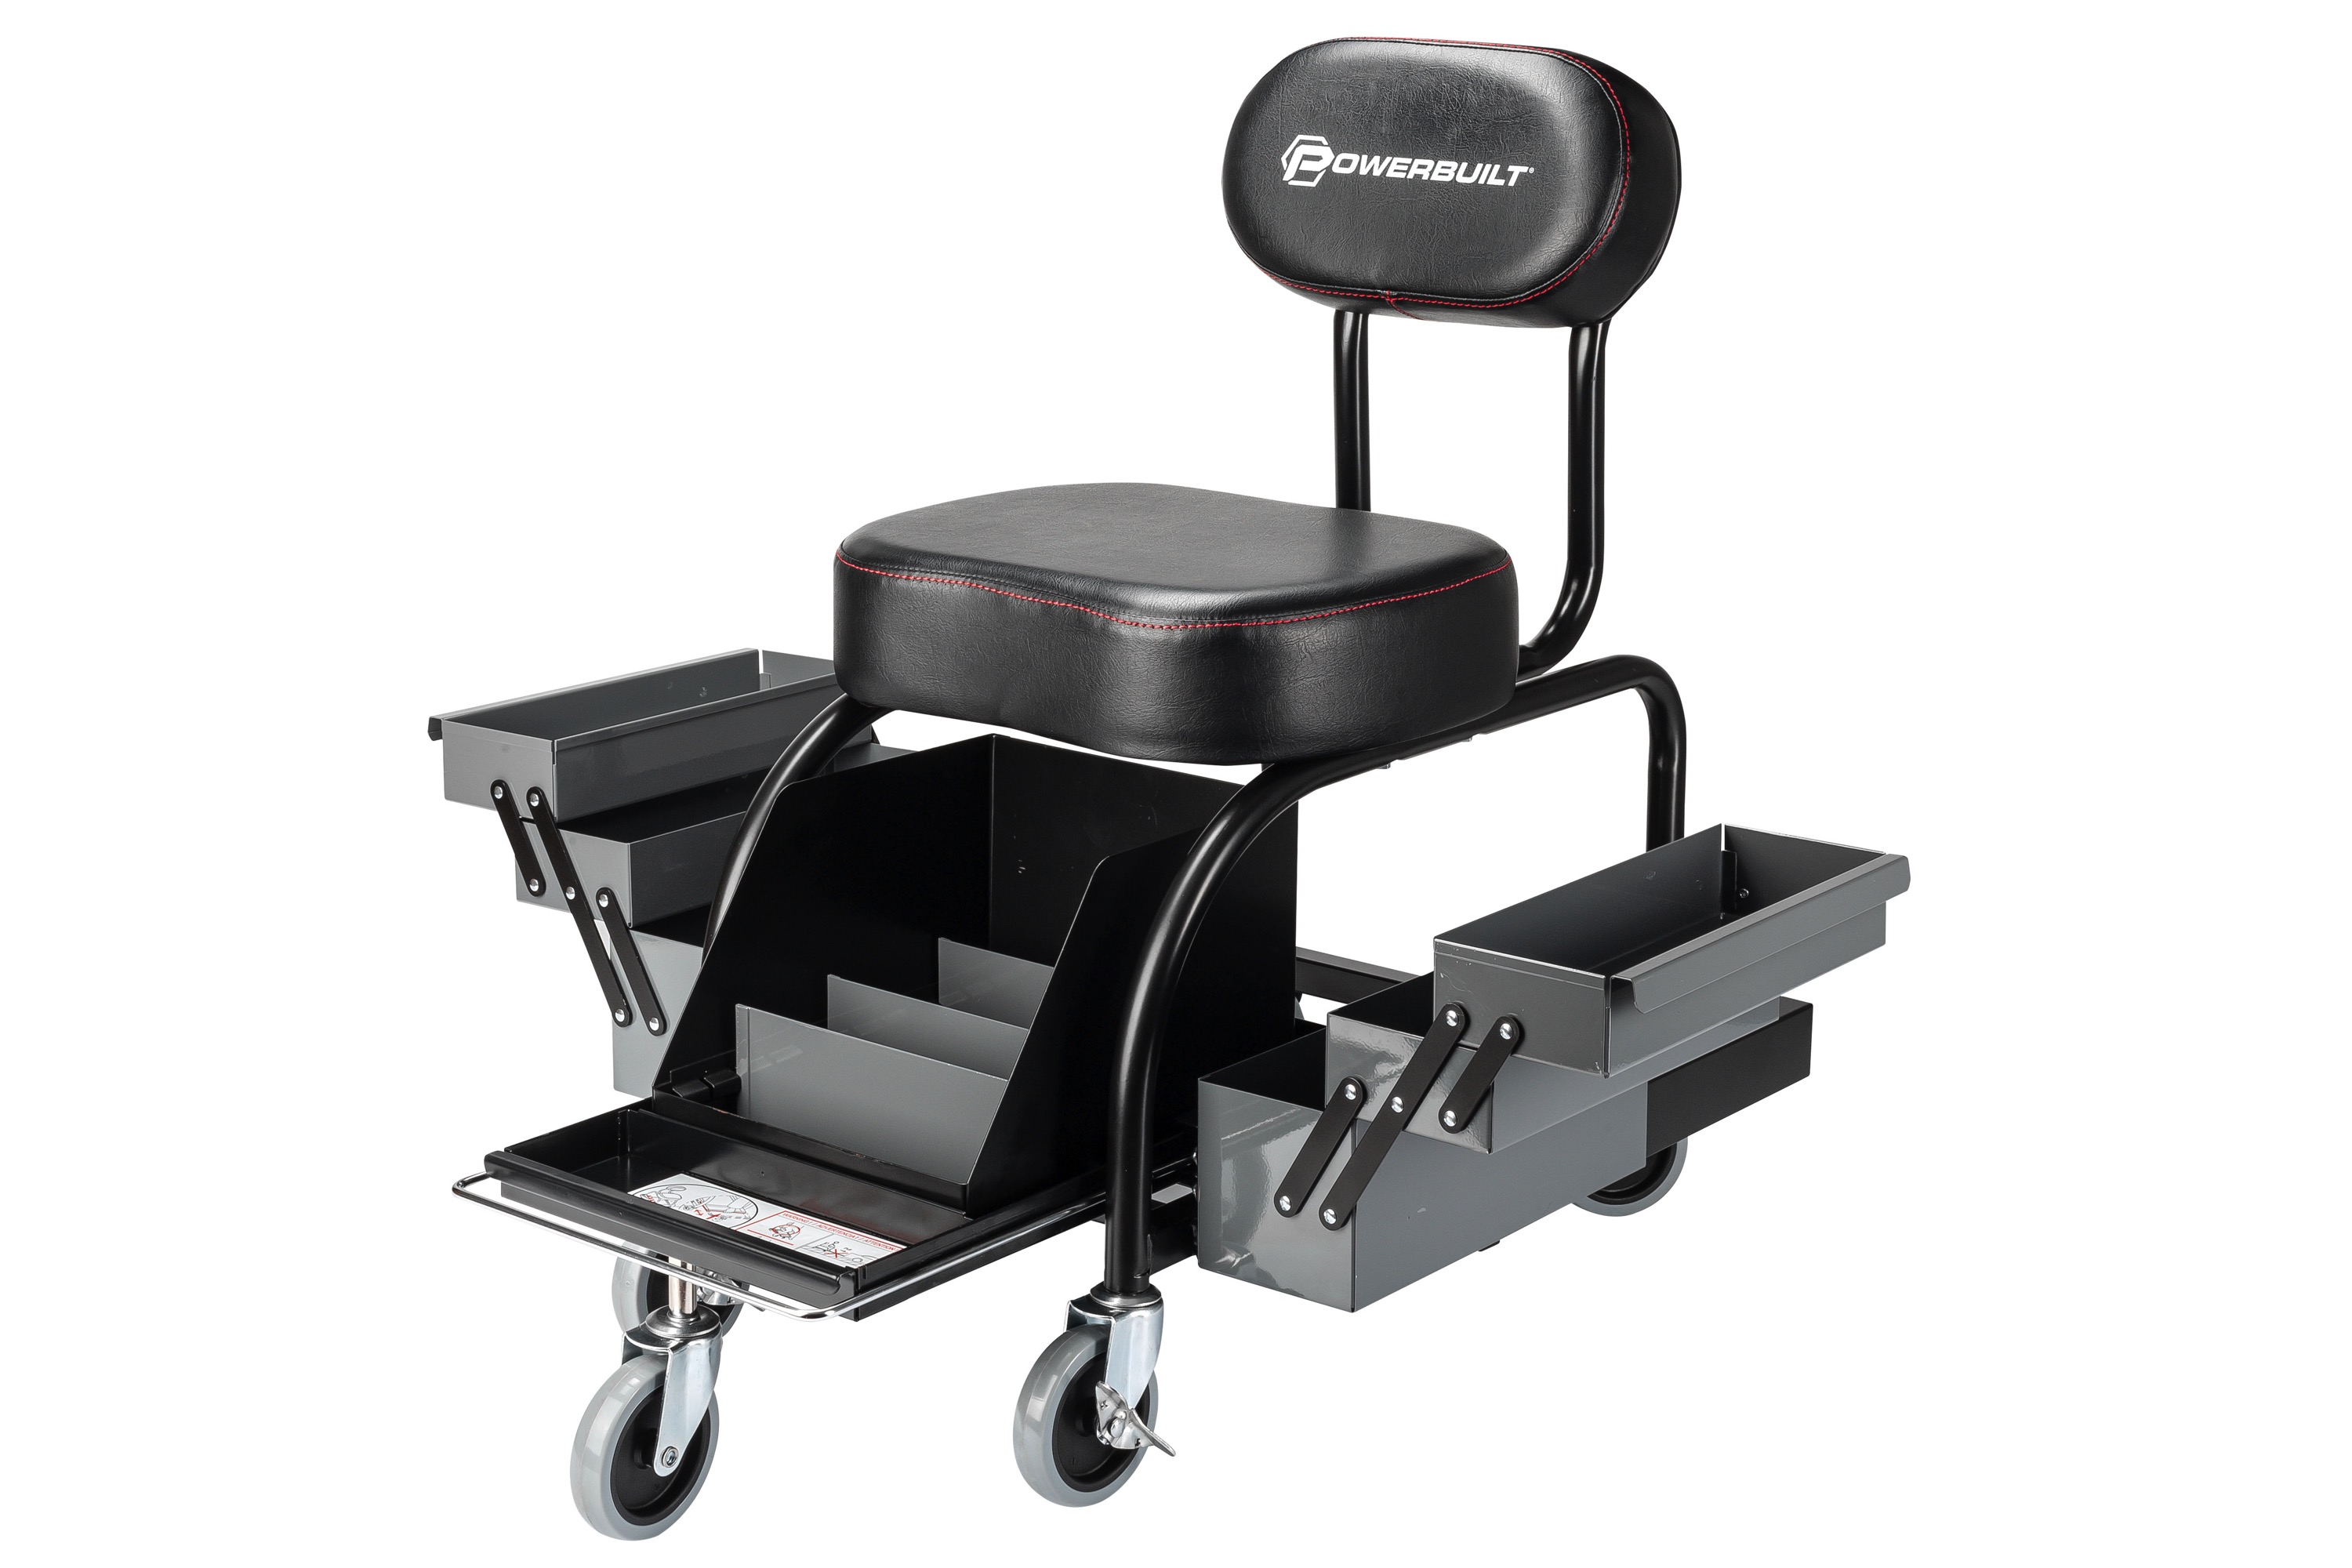 Powerbuilt Professional Shop Seat With Expandable Side Trays - 941929ECE - image 1 of 3